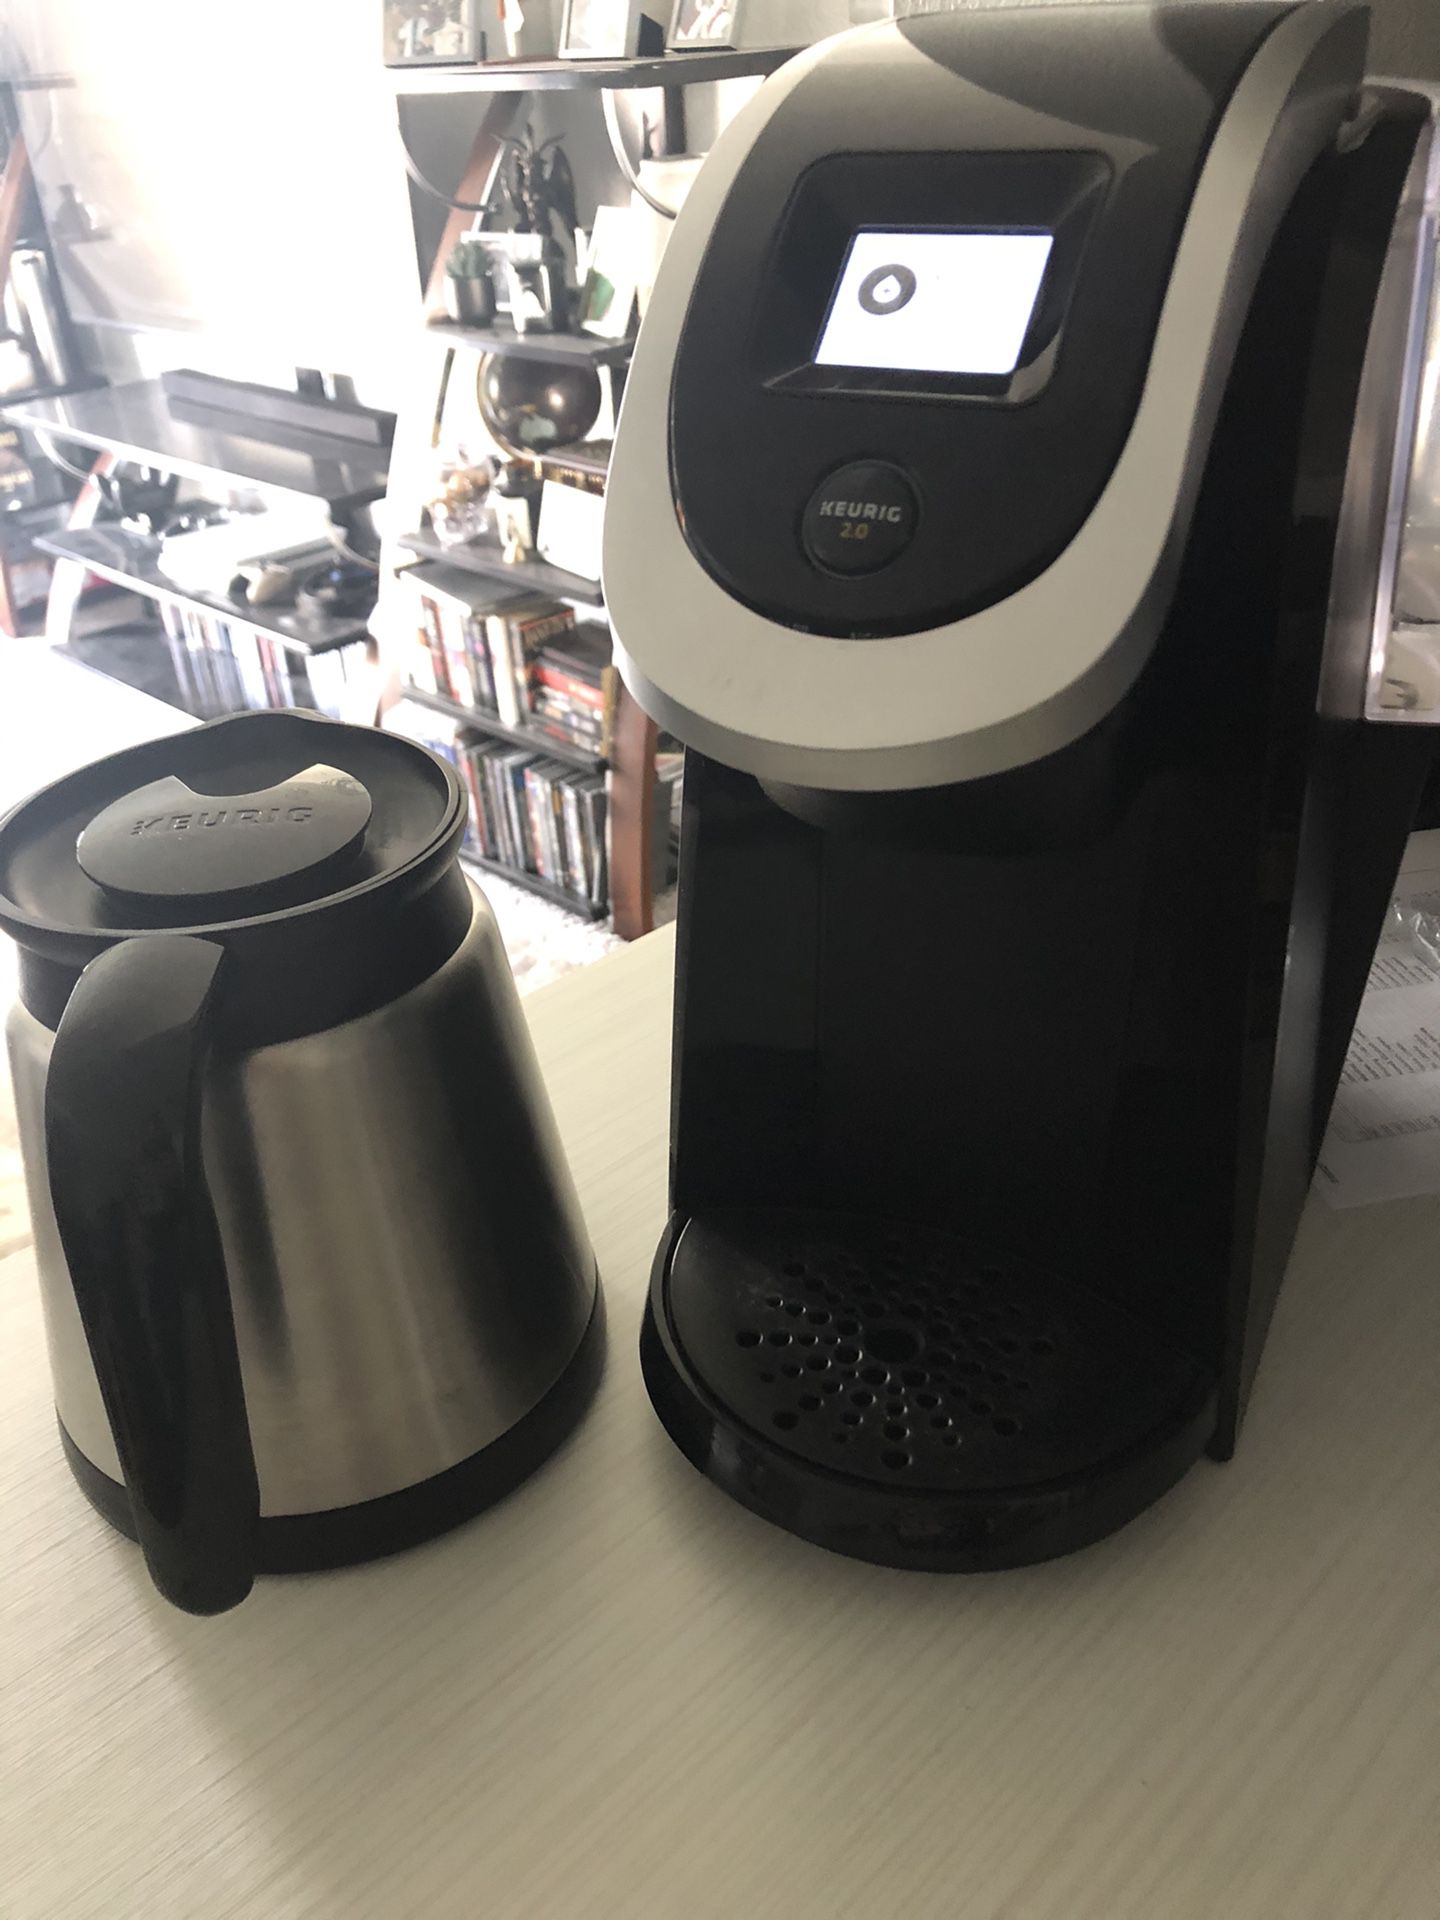 Keurig 2.0 with coffee pot attachment